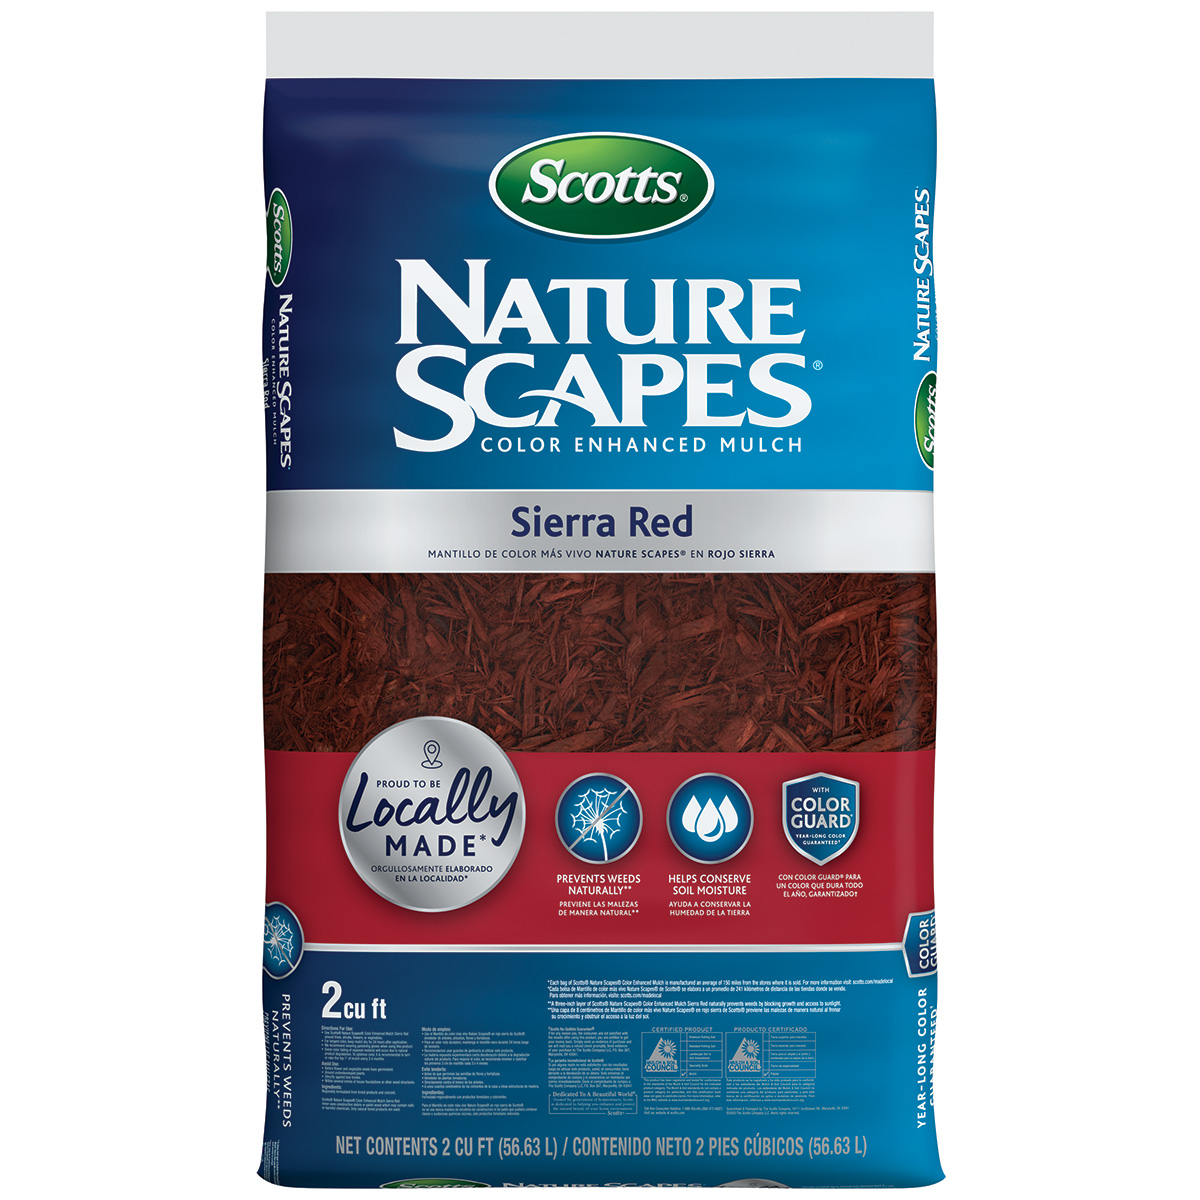 2 Cu. Ft. Scotts Sierra Red Nature Scapes Mulch - Gebo's